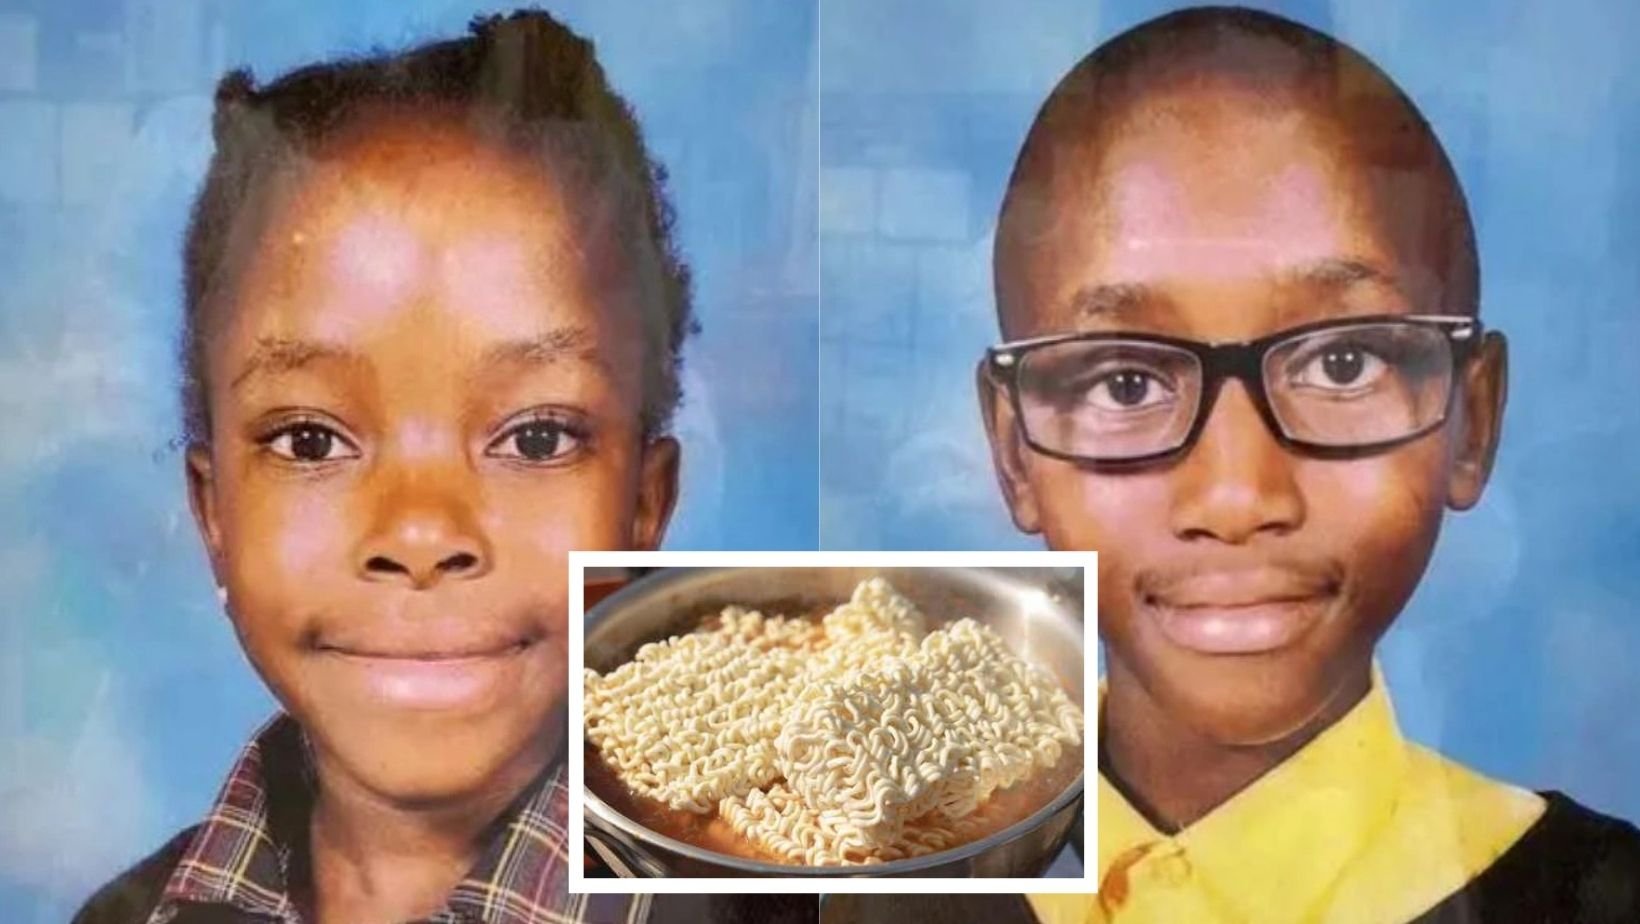 1 68.jpg?resize=412,232 - Family Is Left Devastated When Five Kids Died After Eating INSTANT NOODLES, Urging Other Parents To Not Feed Noodle Packets To Children